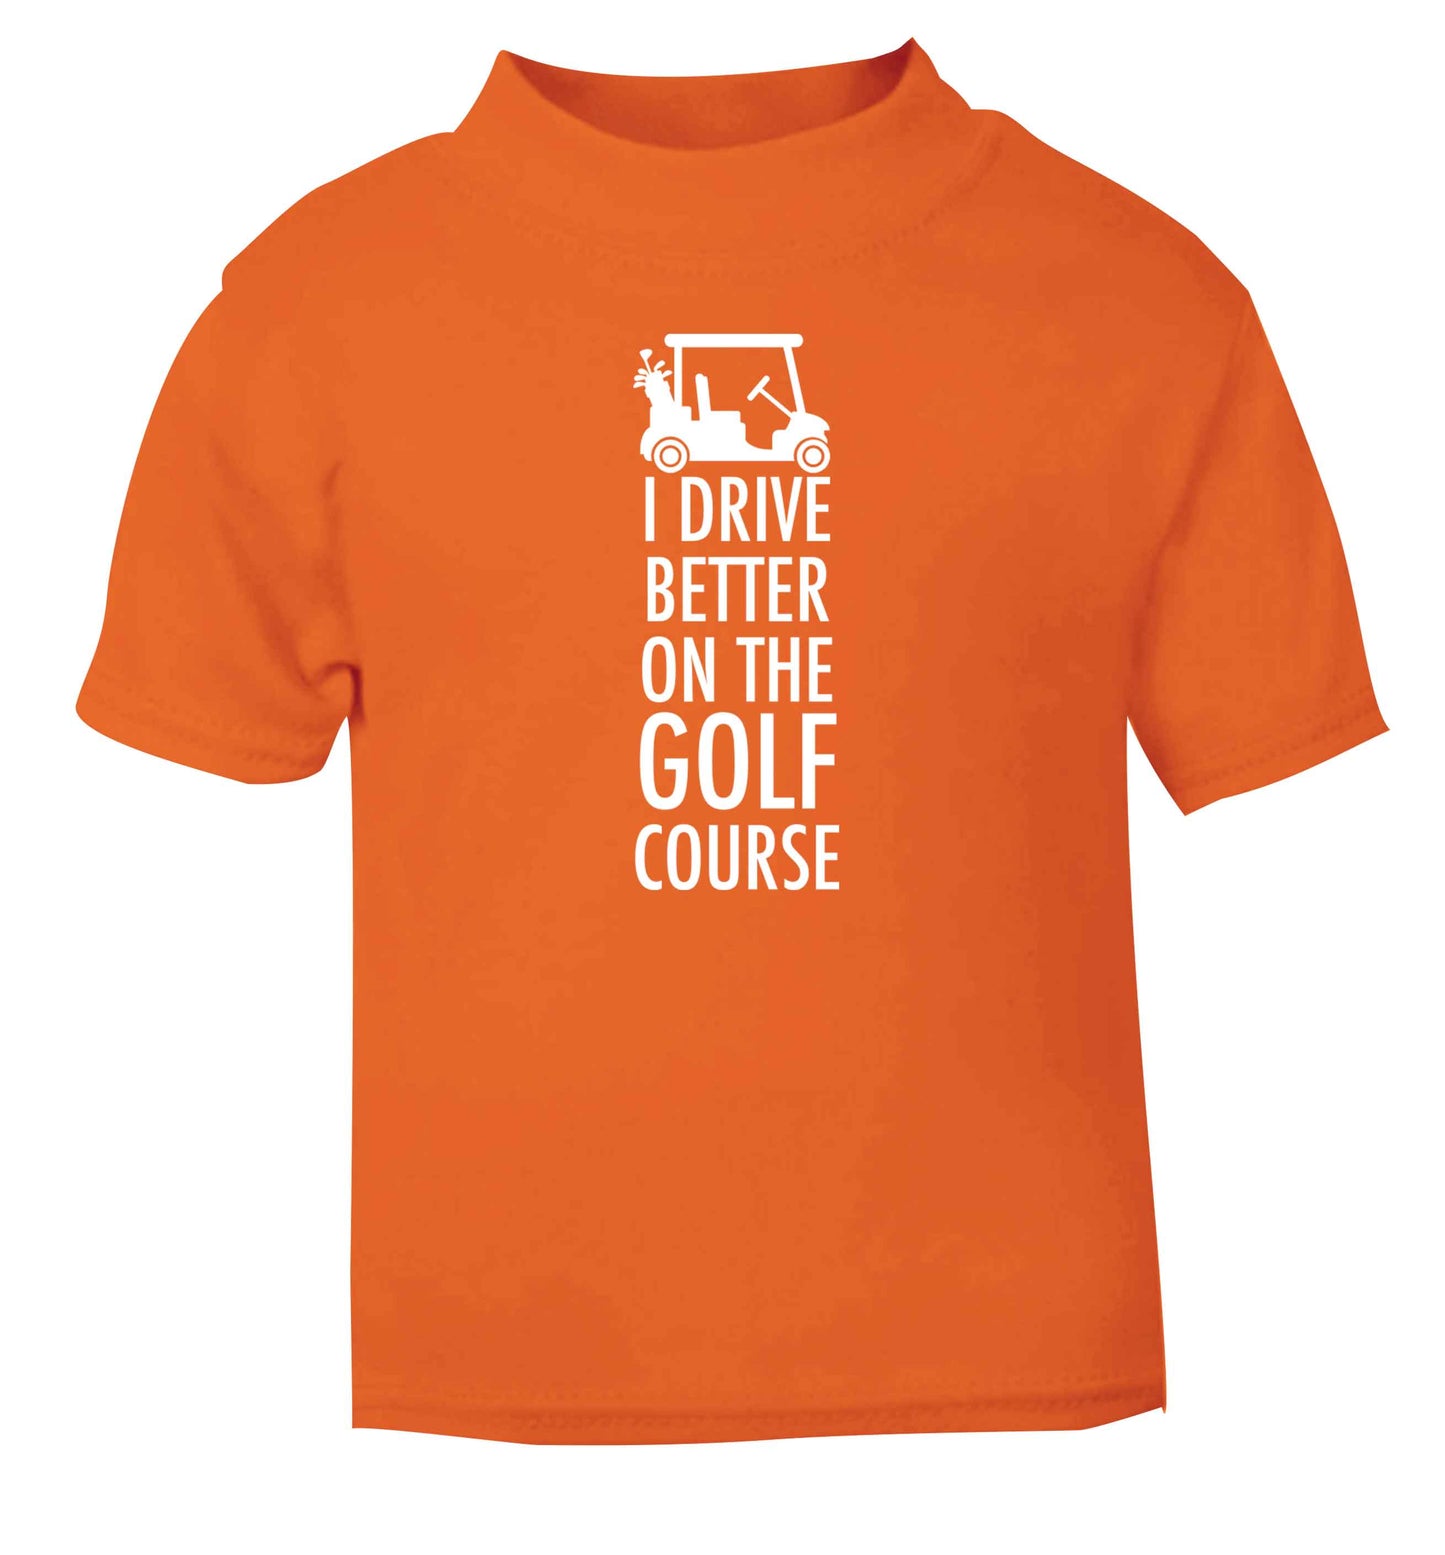 I drive better on the golf course orange Baby Toddler Tshirt 2 Years